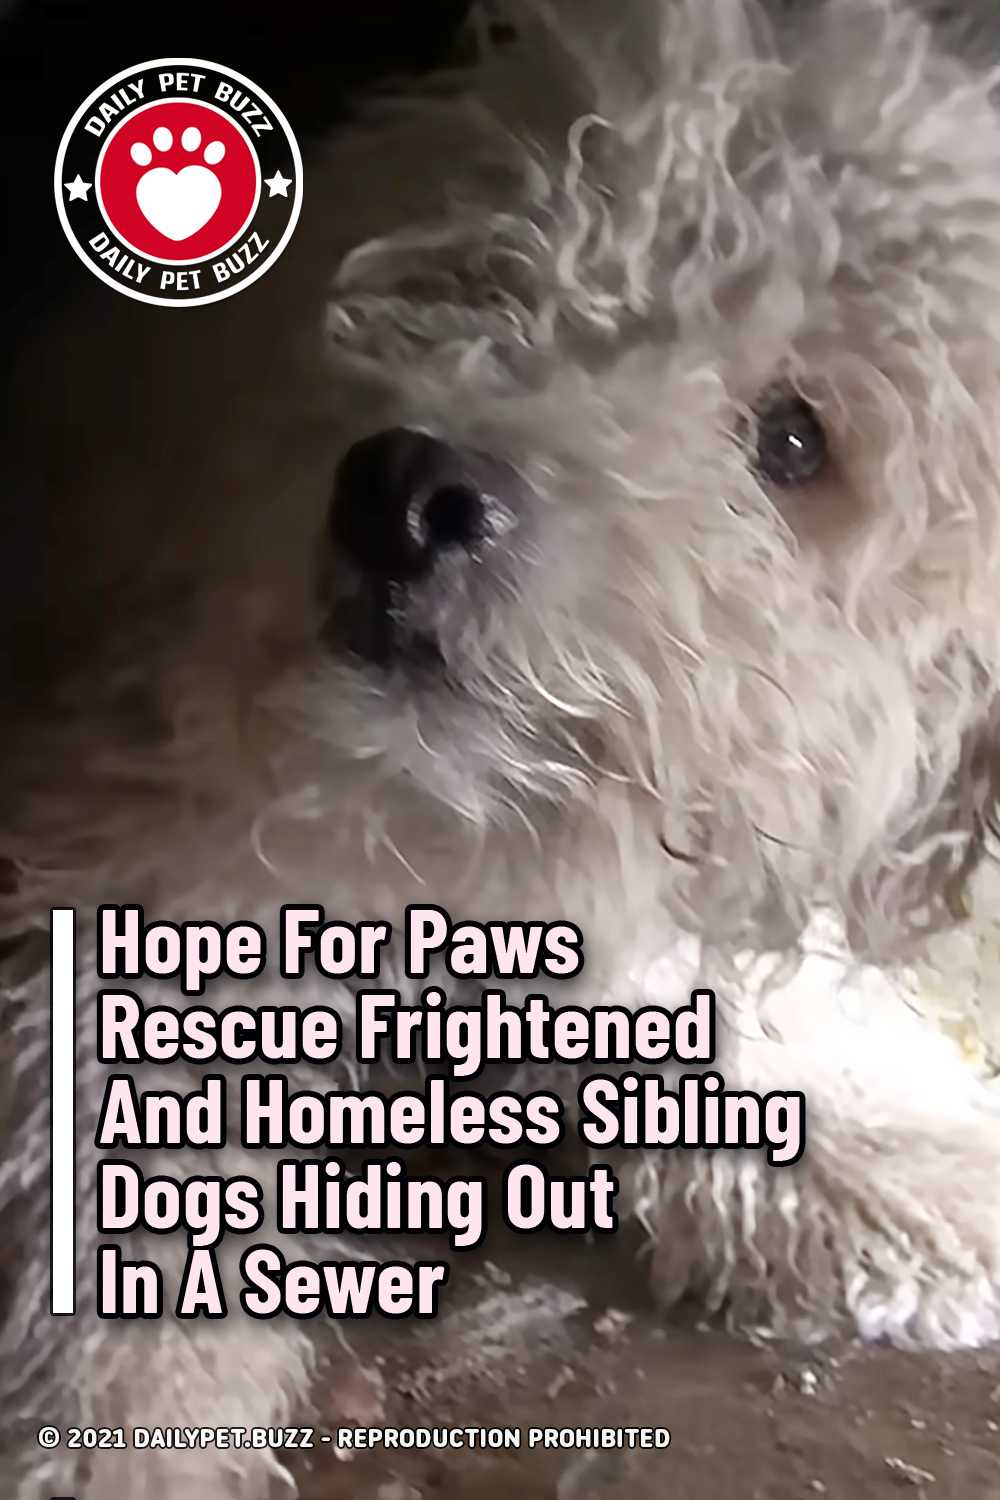 Hope For Paws Rescue Frightened And Homeless Sibling Dogs Hiding Out In A Sewer